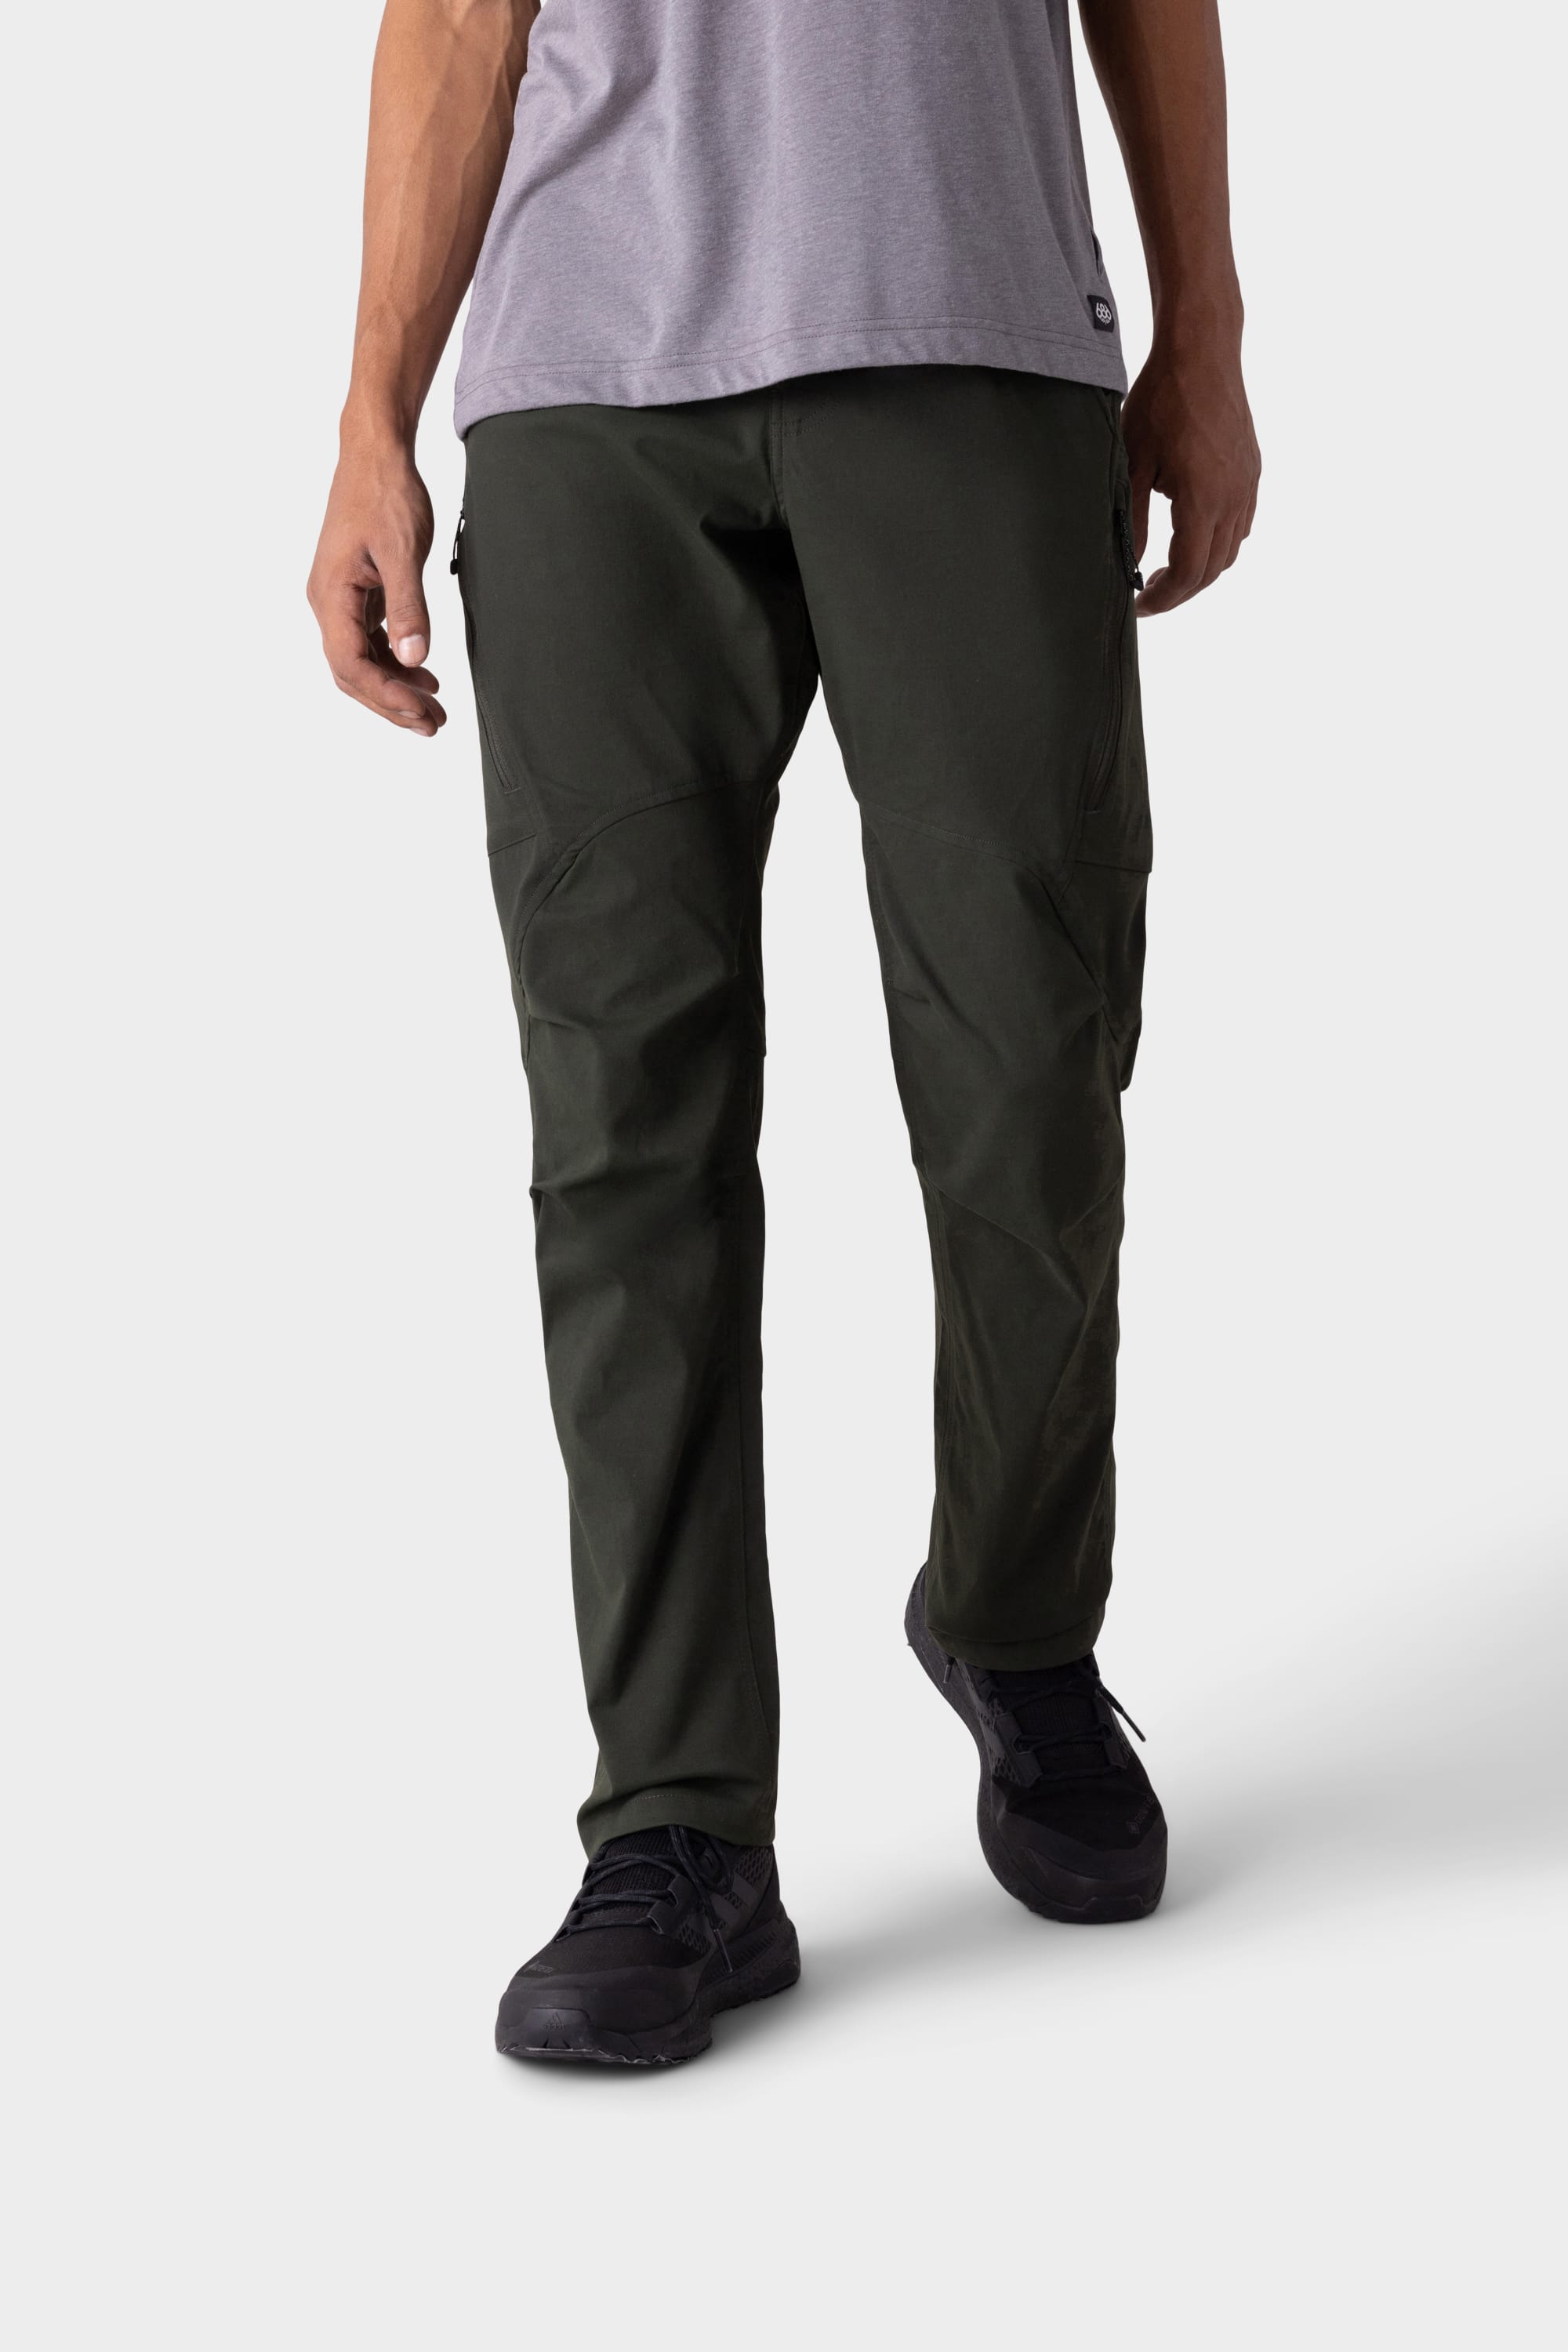 Relaxed Fit Nylon Cargo Pants - Light sage green - Men